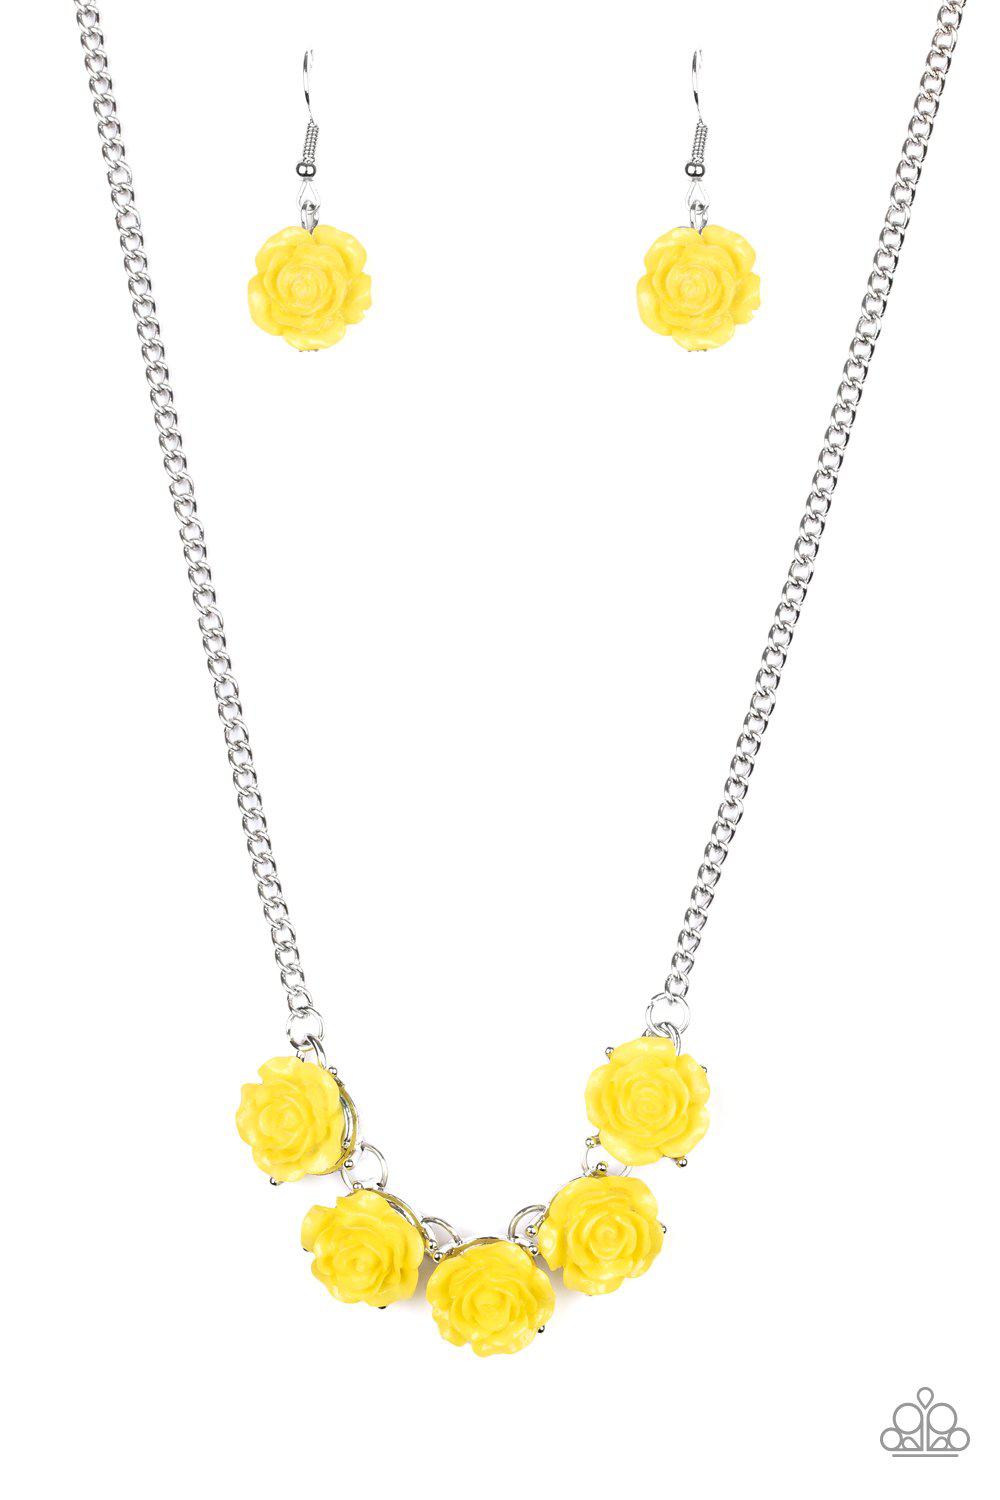 Garden Party Posh Yellow Rose Flower Necklace - Paparazzi Accessories - lightbox -CarasShop.com - $5 Jewelry by Cara Jewels